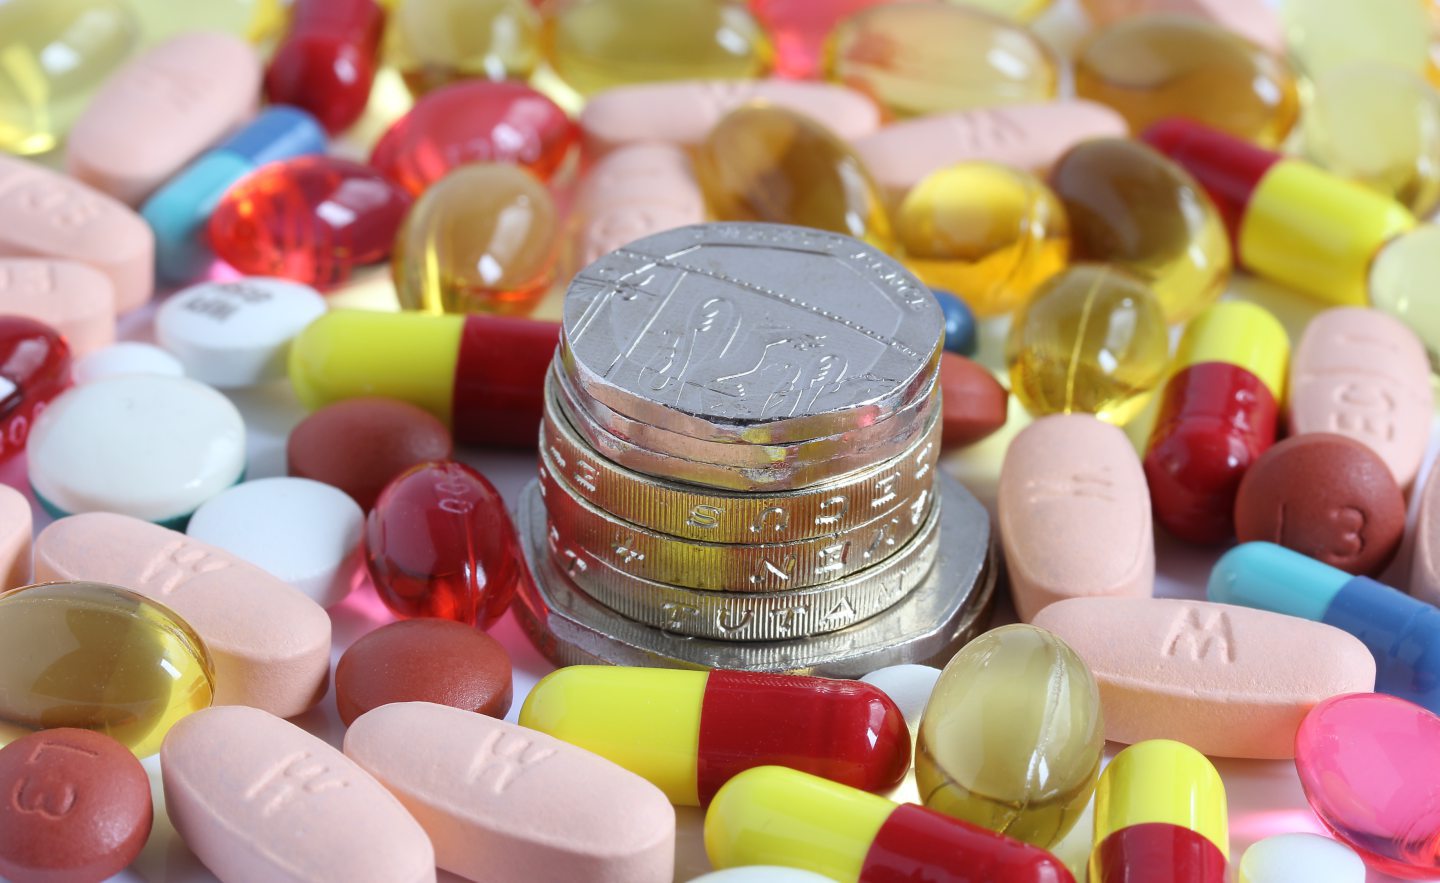 Some savings will come from stopping pills proven to have 'little clinical value'. Image: Shutterstock / TakeStockPhotogra